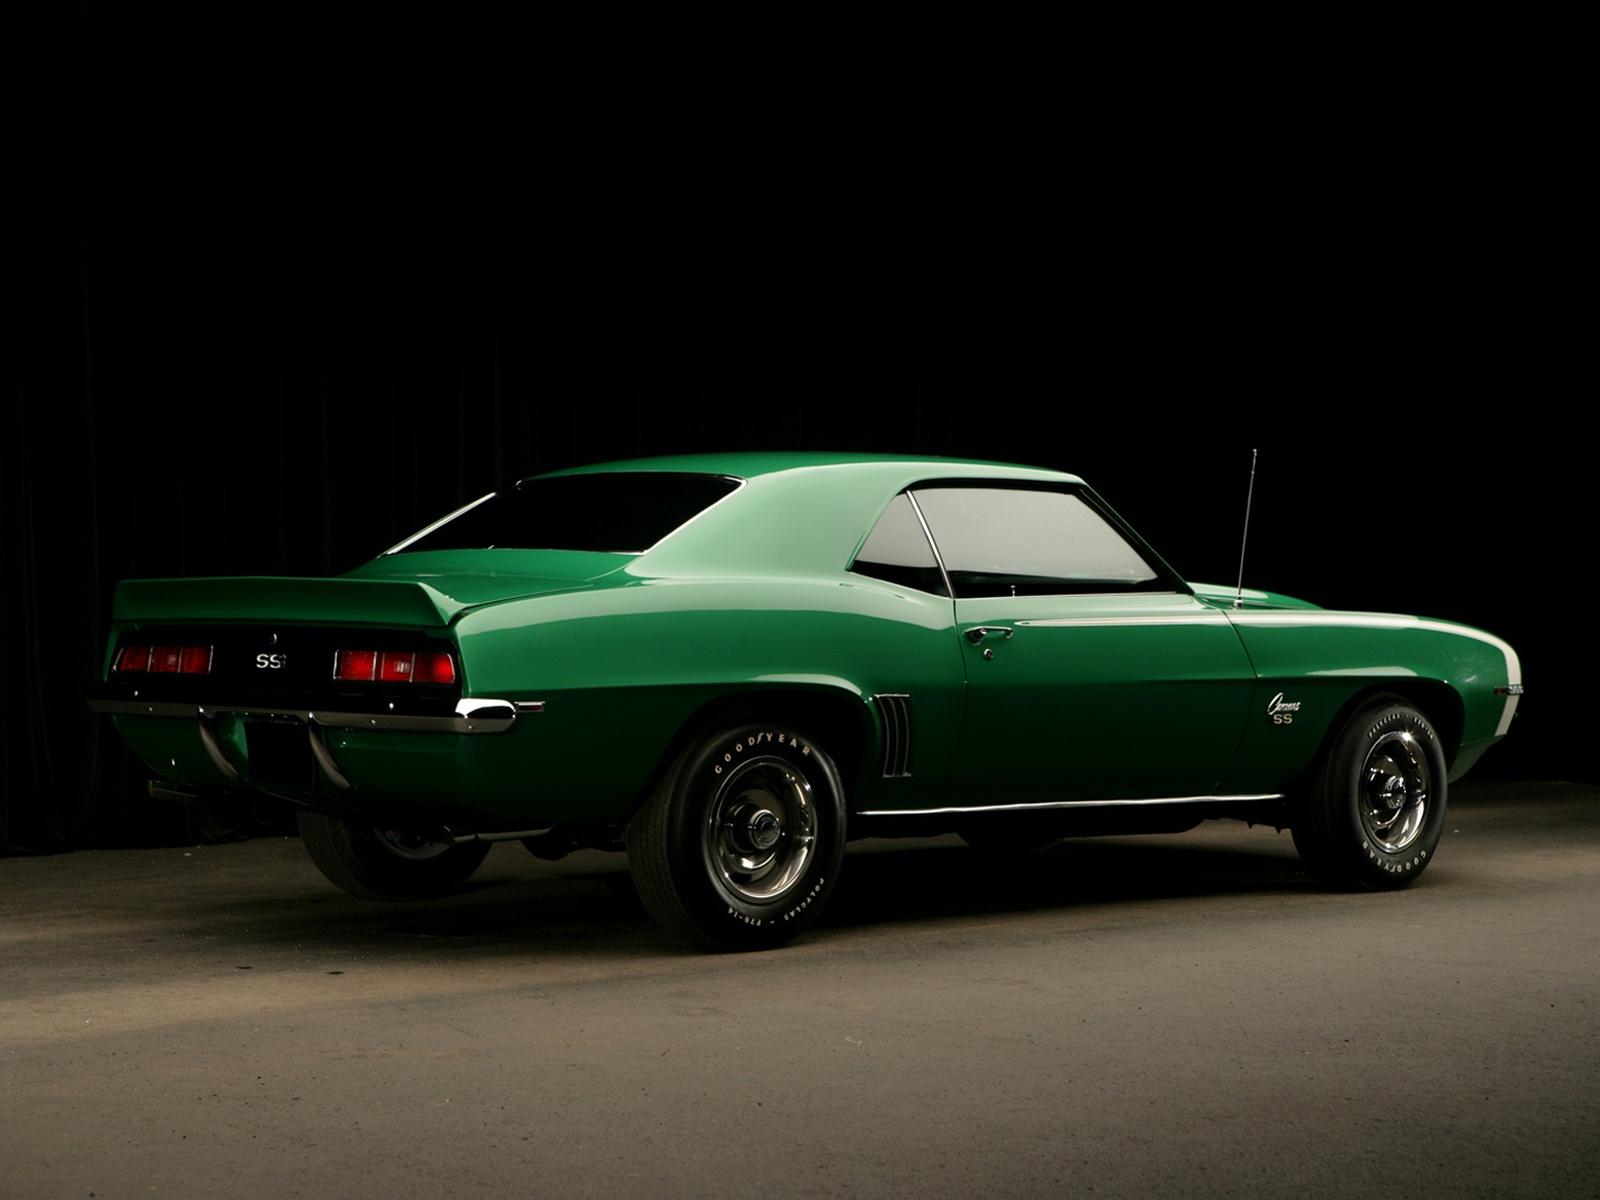 American Muscle Car Wallpaper 6523 Hd Wallpapers in Cars   Imagesci 1600x1200